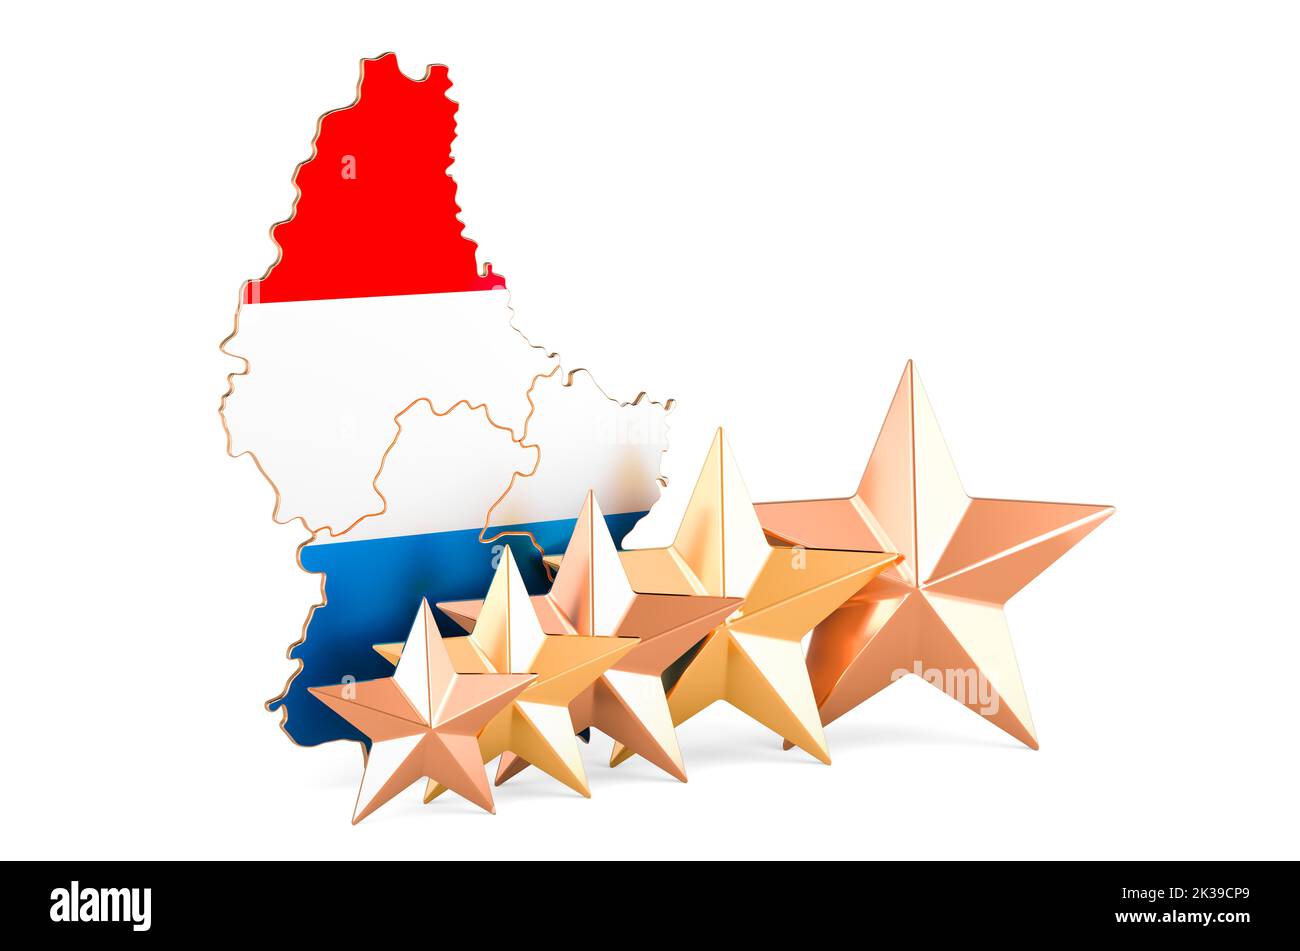 Luxembourgish map with five stars. Rating, quality, service in Luxembourg. 3D rendering isolated on white background Stock Photo